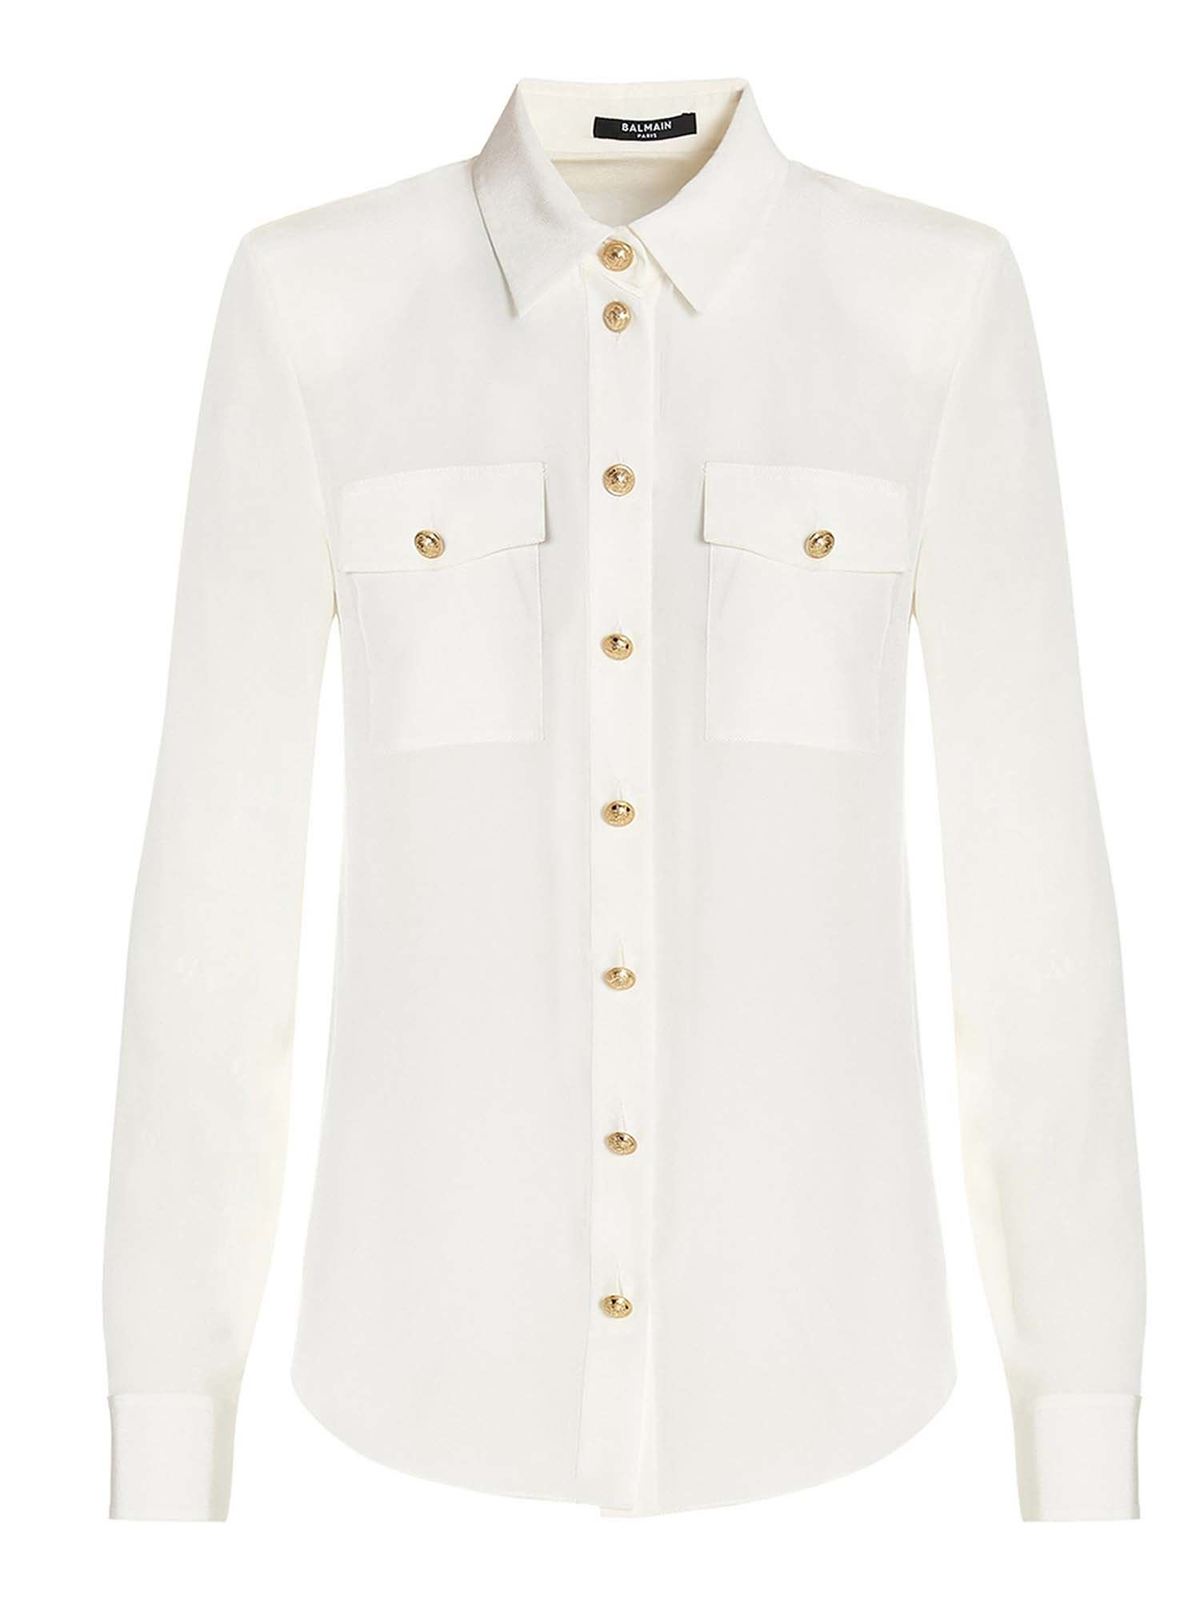 BALMAIN GOLD COLORED BUTTONS SHIRT IN WHITE